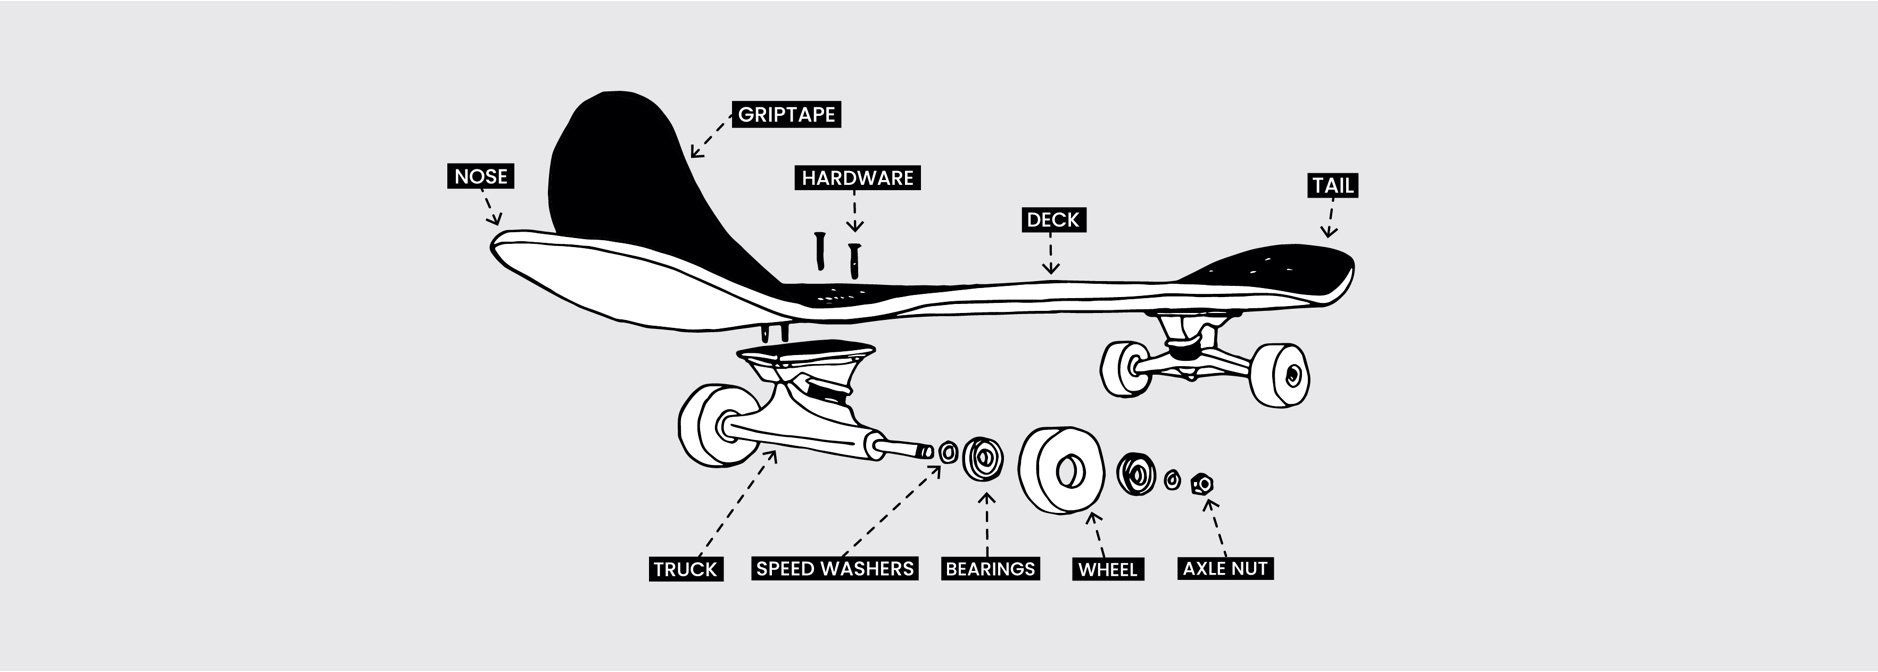 How To Build A Complete Skateboard | KCDC Skateshop